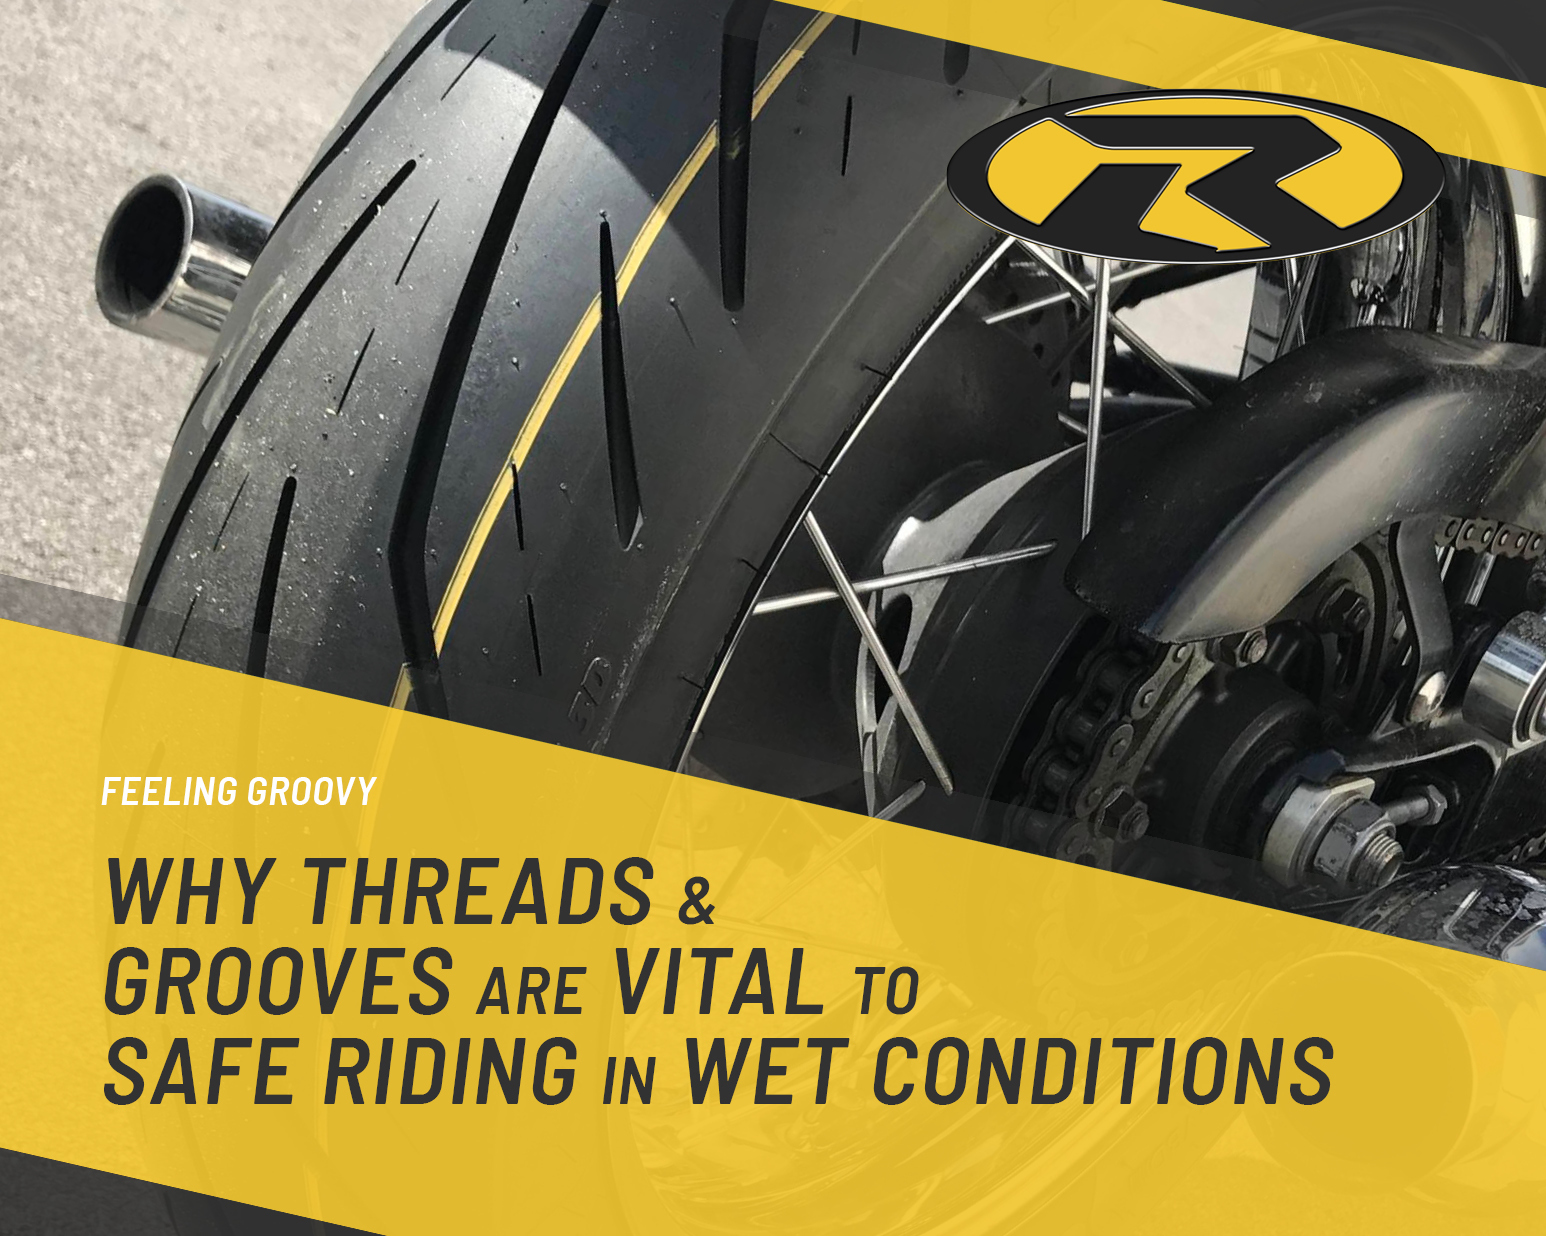 Feeling Groovy – Why threads and grooves are vital to safe riding in wet conditions